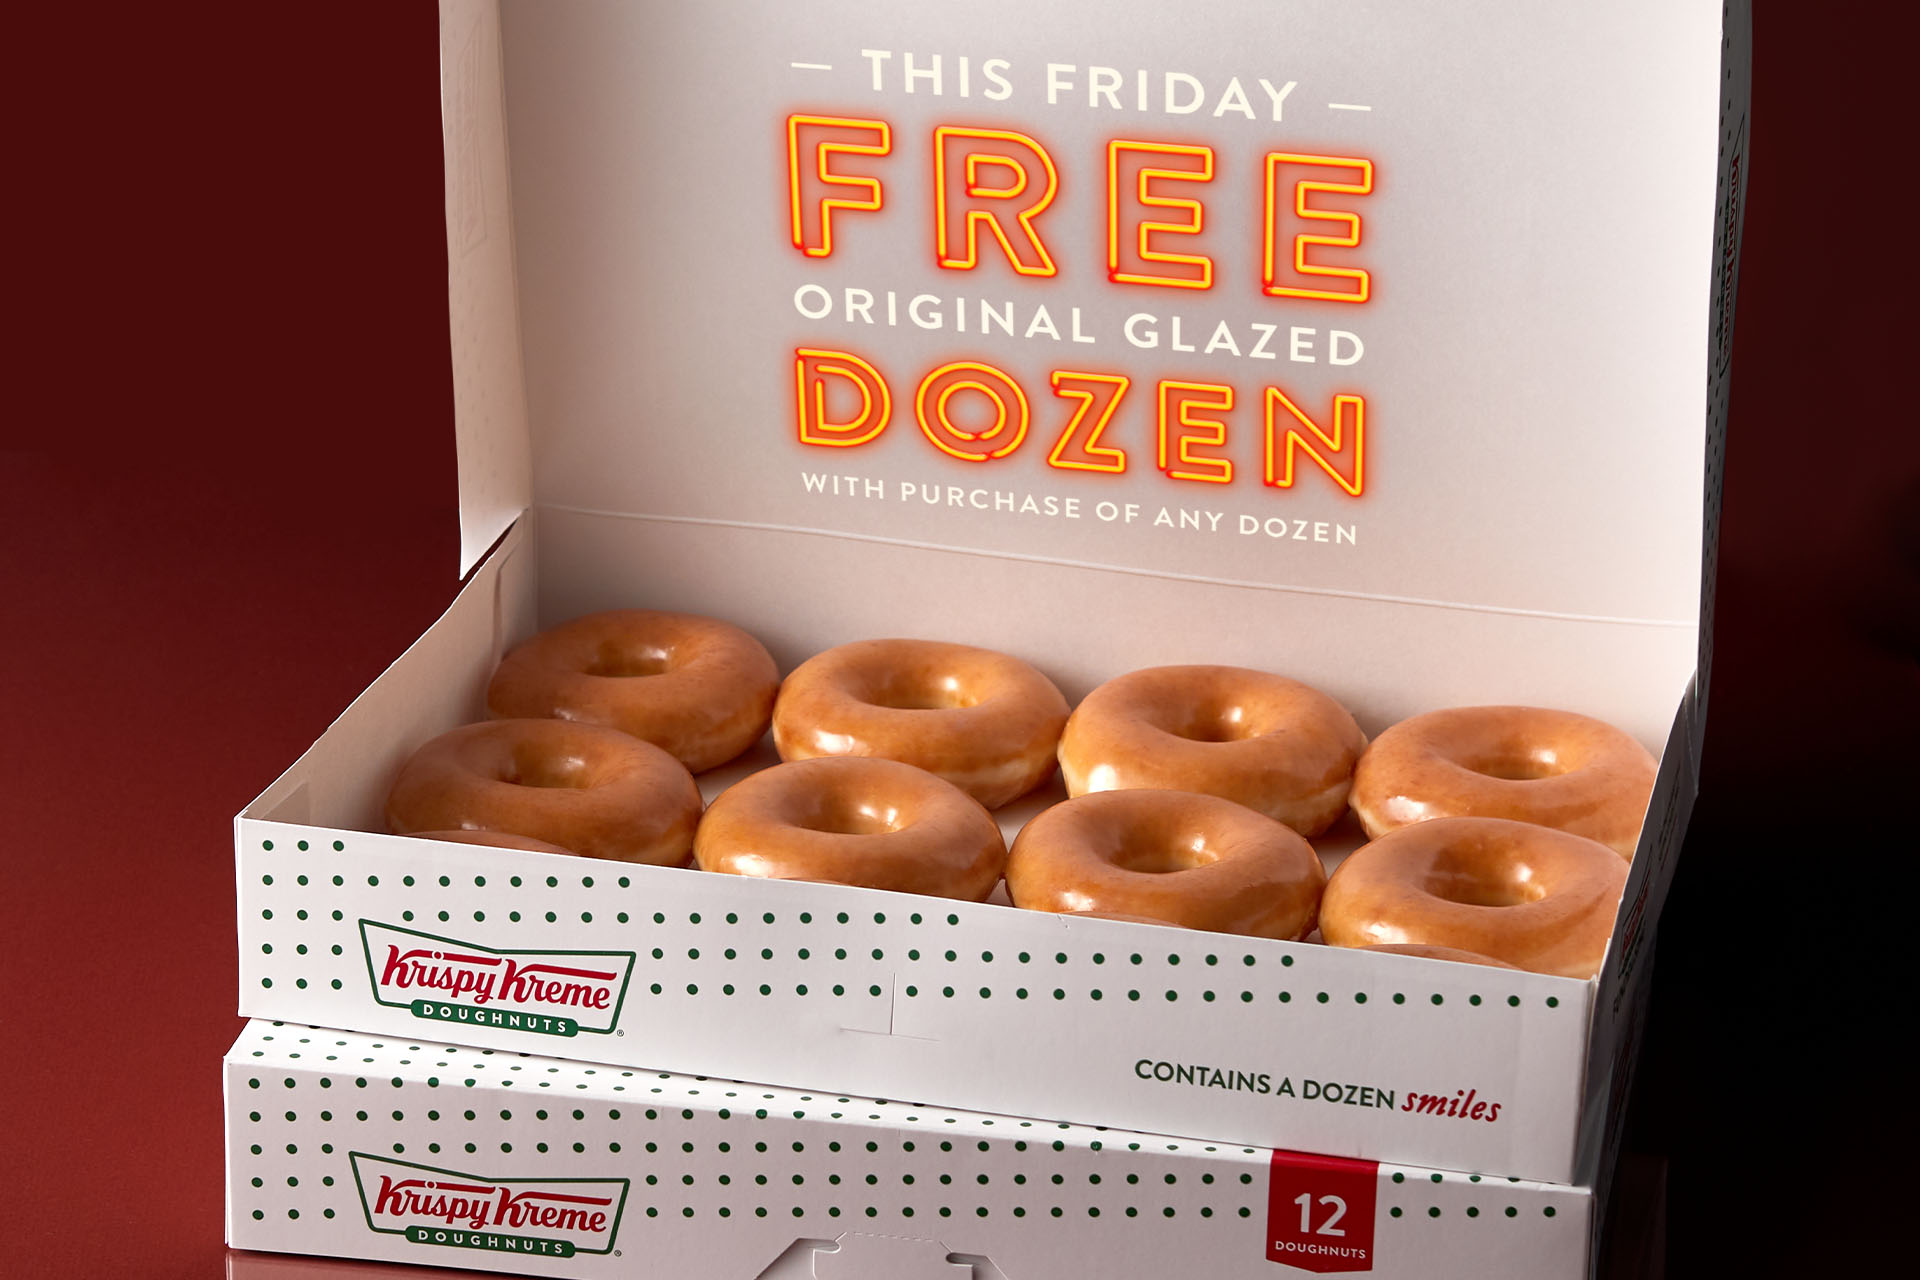 How to get a dozen free donuts from Krispy Kreme on Friday